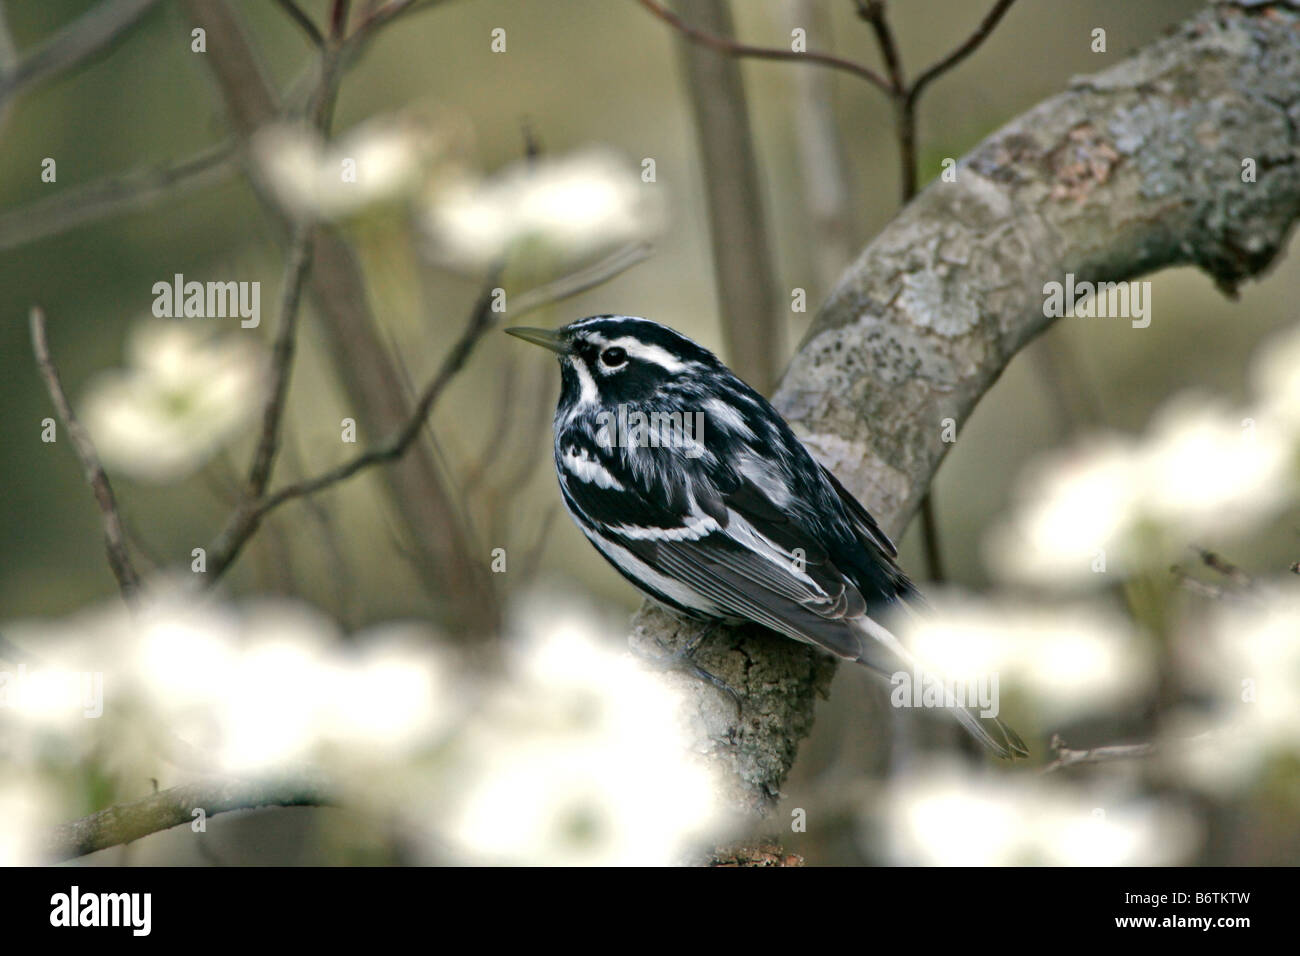 Black and White Warbler Perched in Dogwood Tree Blossoms Stock Photo